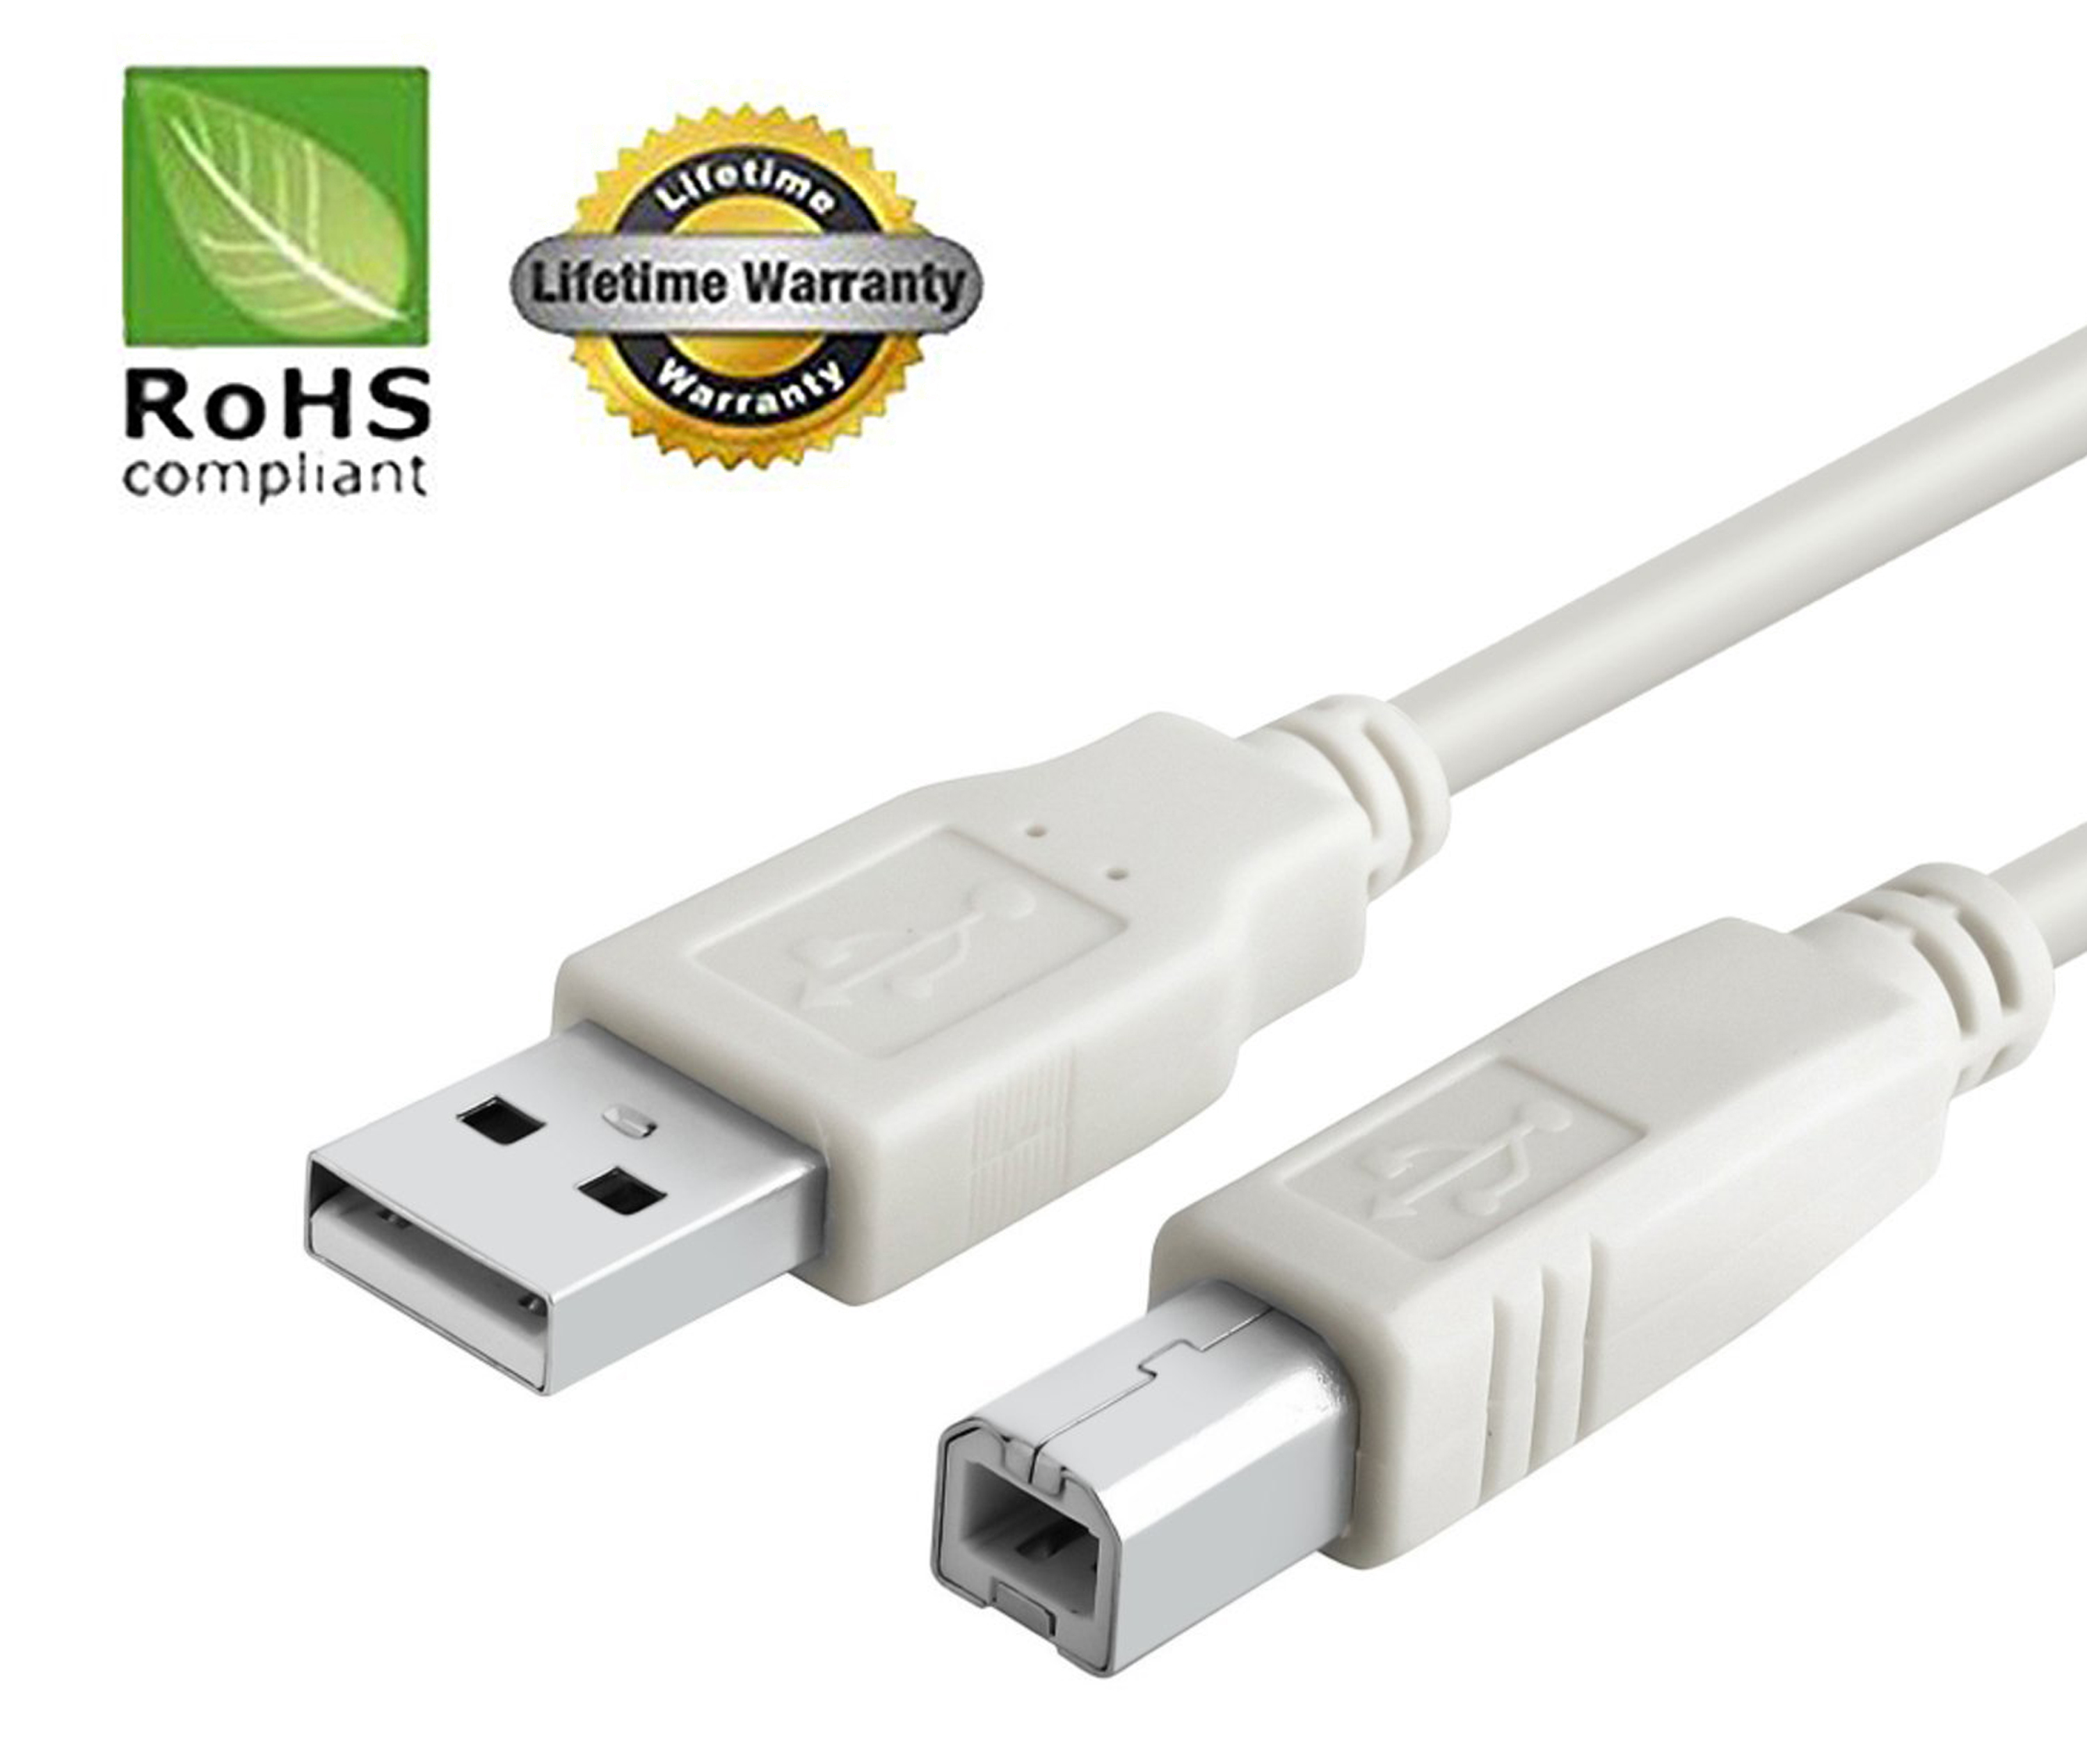 USB 2.0 Cable - A-Male to B-Male for Toshiba ESTUDIO Printer (Specific Models Only) - 6 FT/2 PACK/IVORY - image 1 of 5